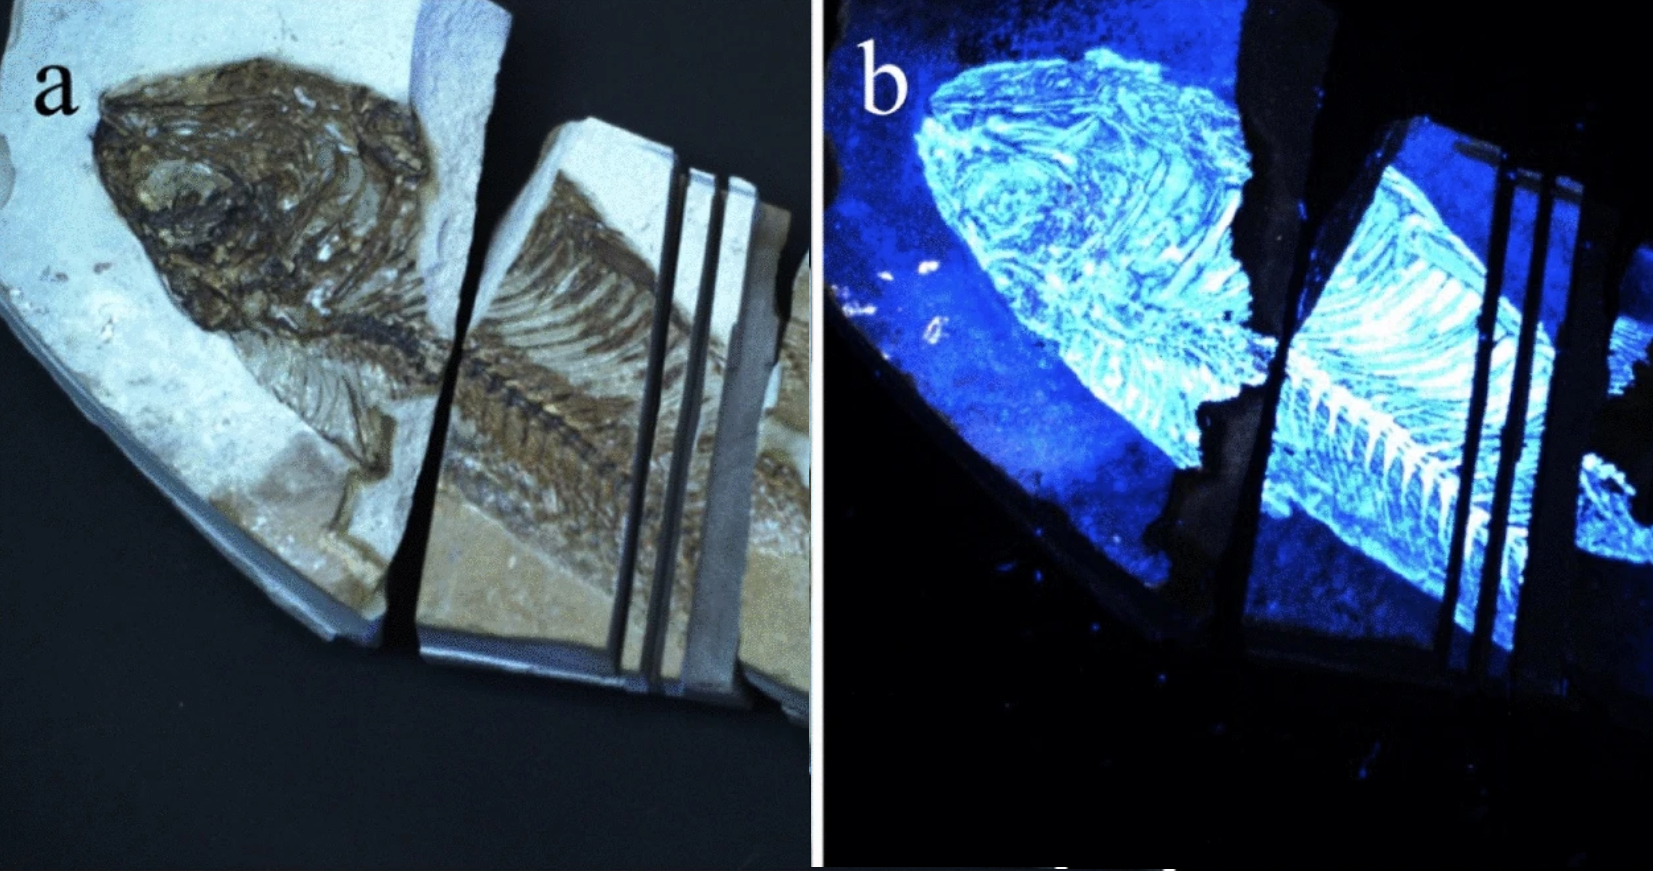 Biofinder detection of biological resides in fish fossil. (a) White light image of a Green River formation fish fossil (b) Fluorescence image of the fish fossil obtained by the Biofinder.